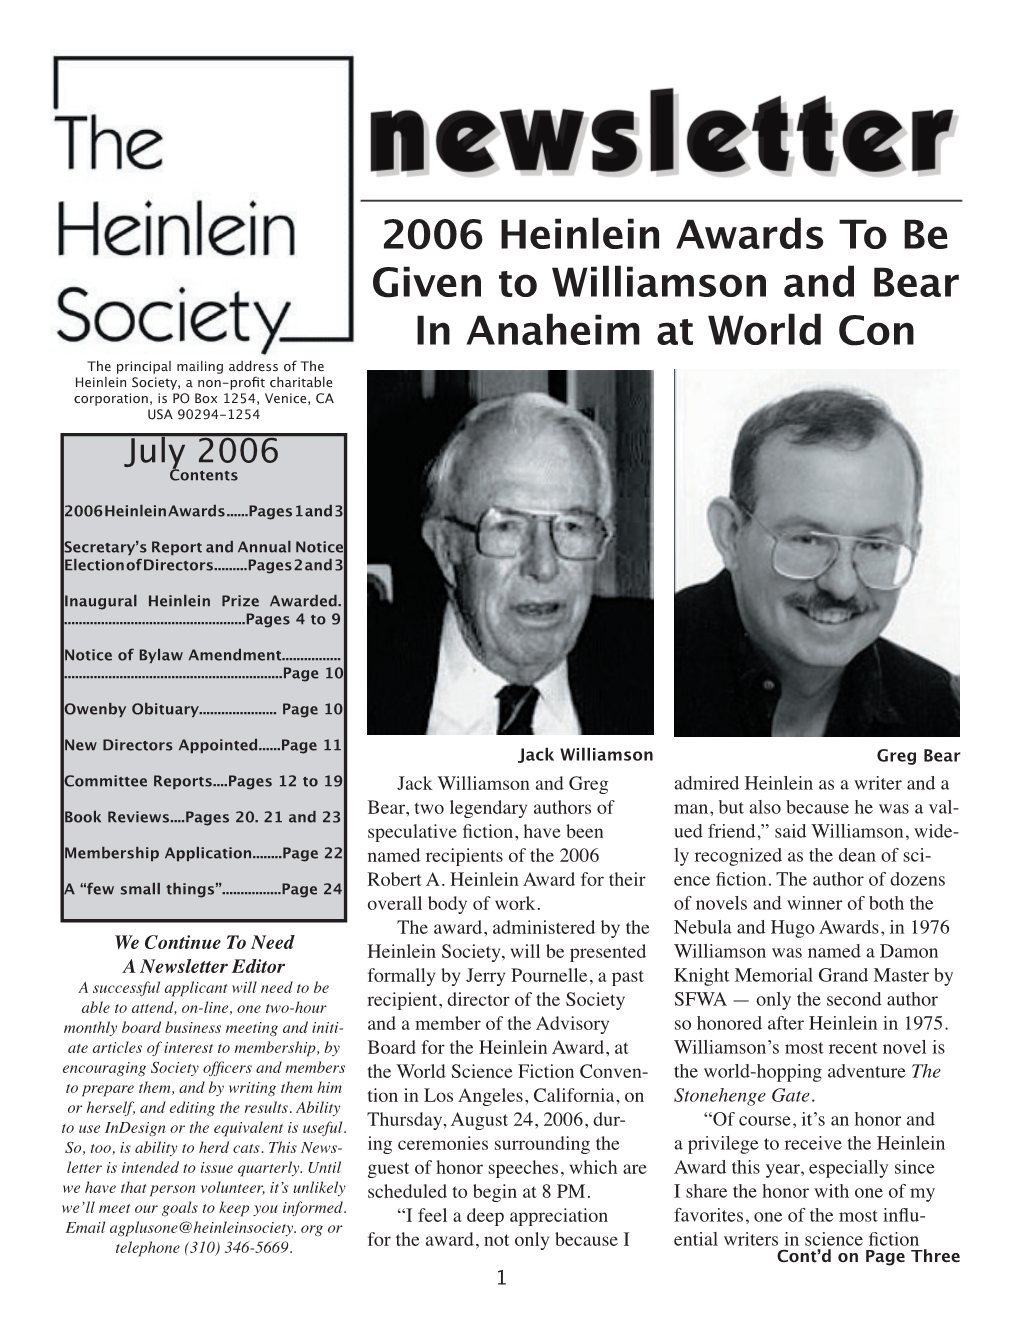 2006 Heinlein Awards to Be Given to Williamson and Bear in Anaheim At